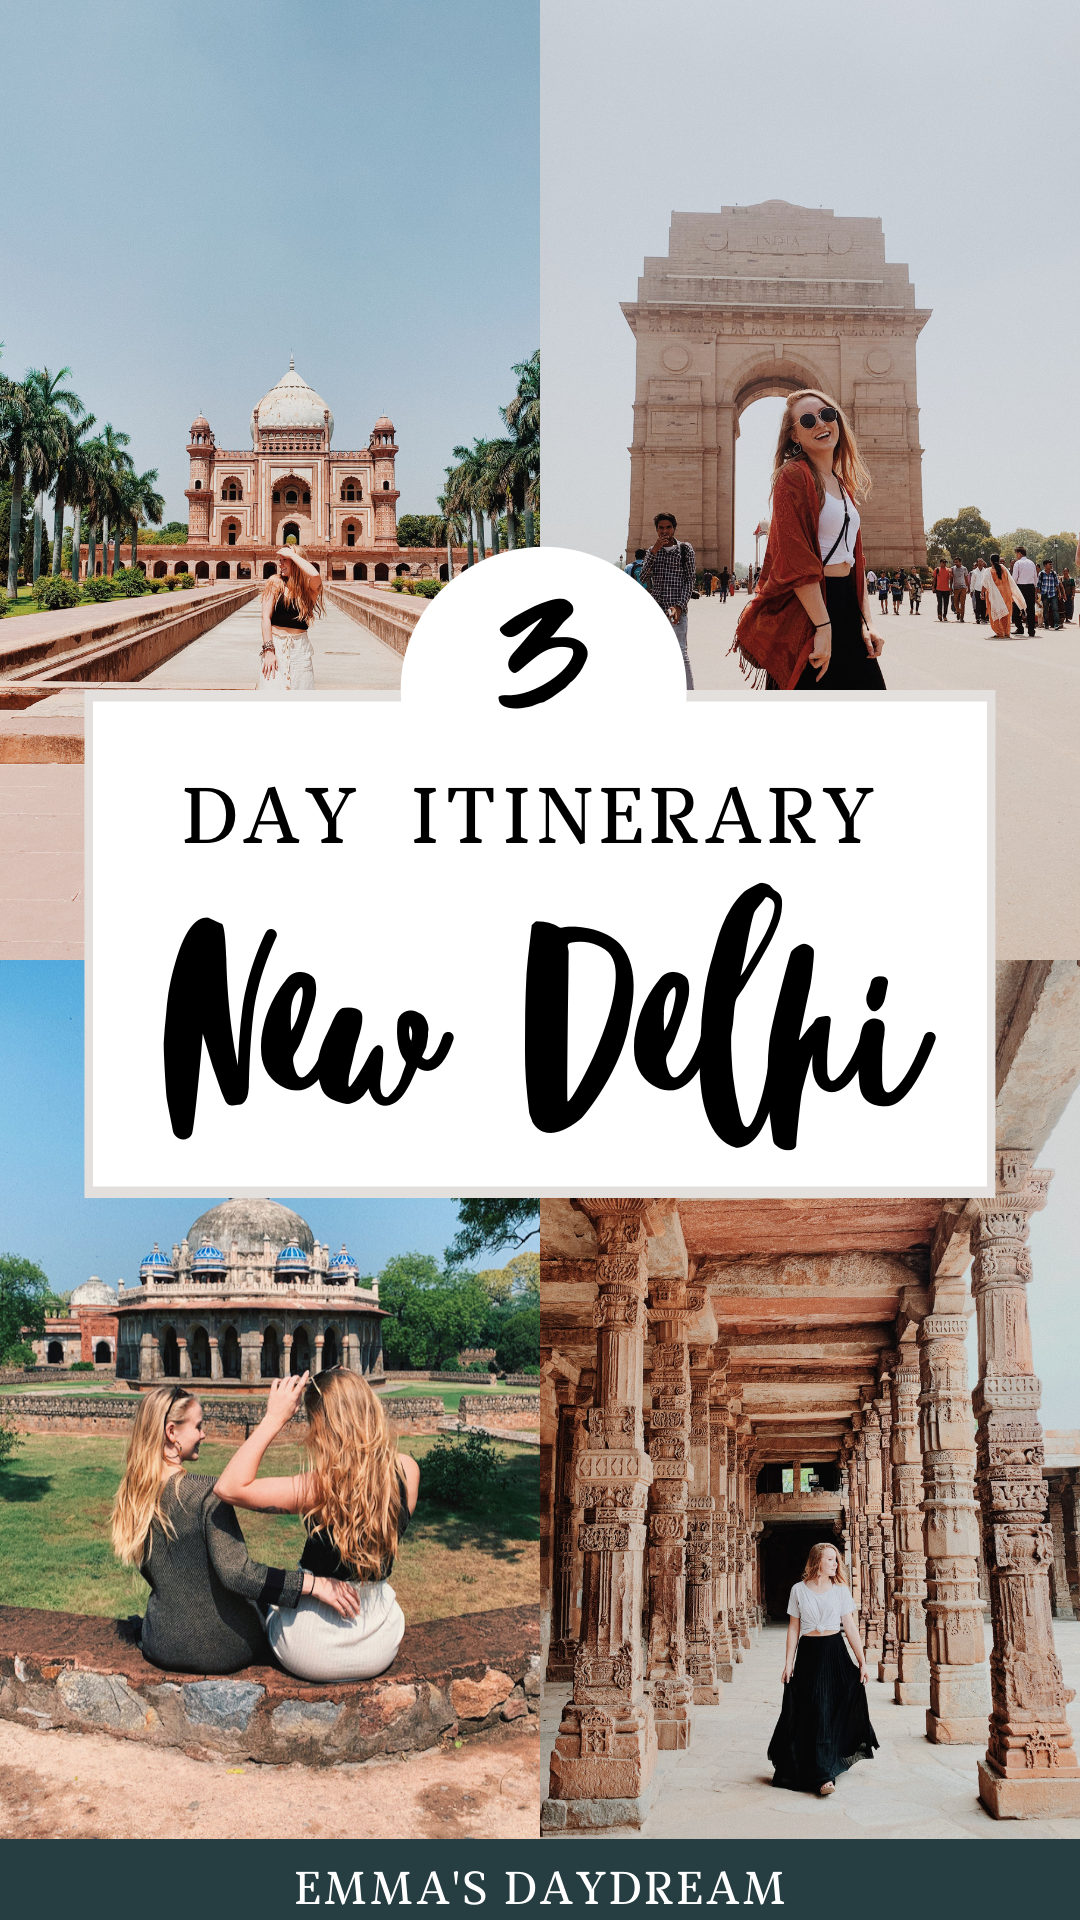 Top 10 places to visit in New Delhi